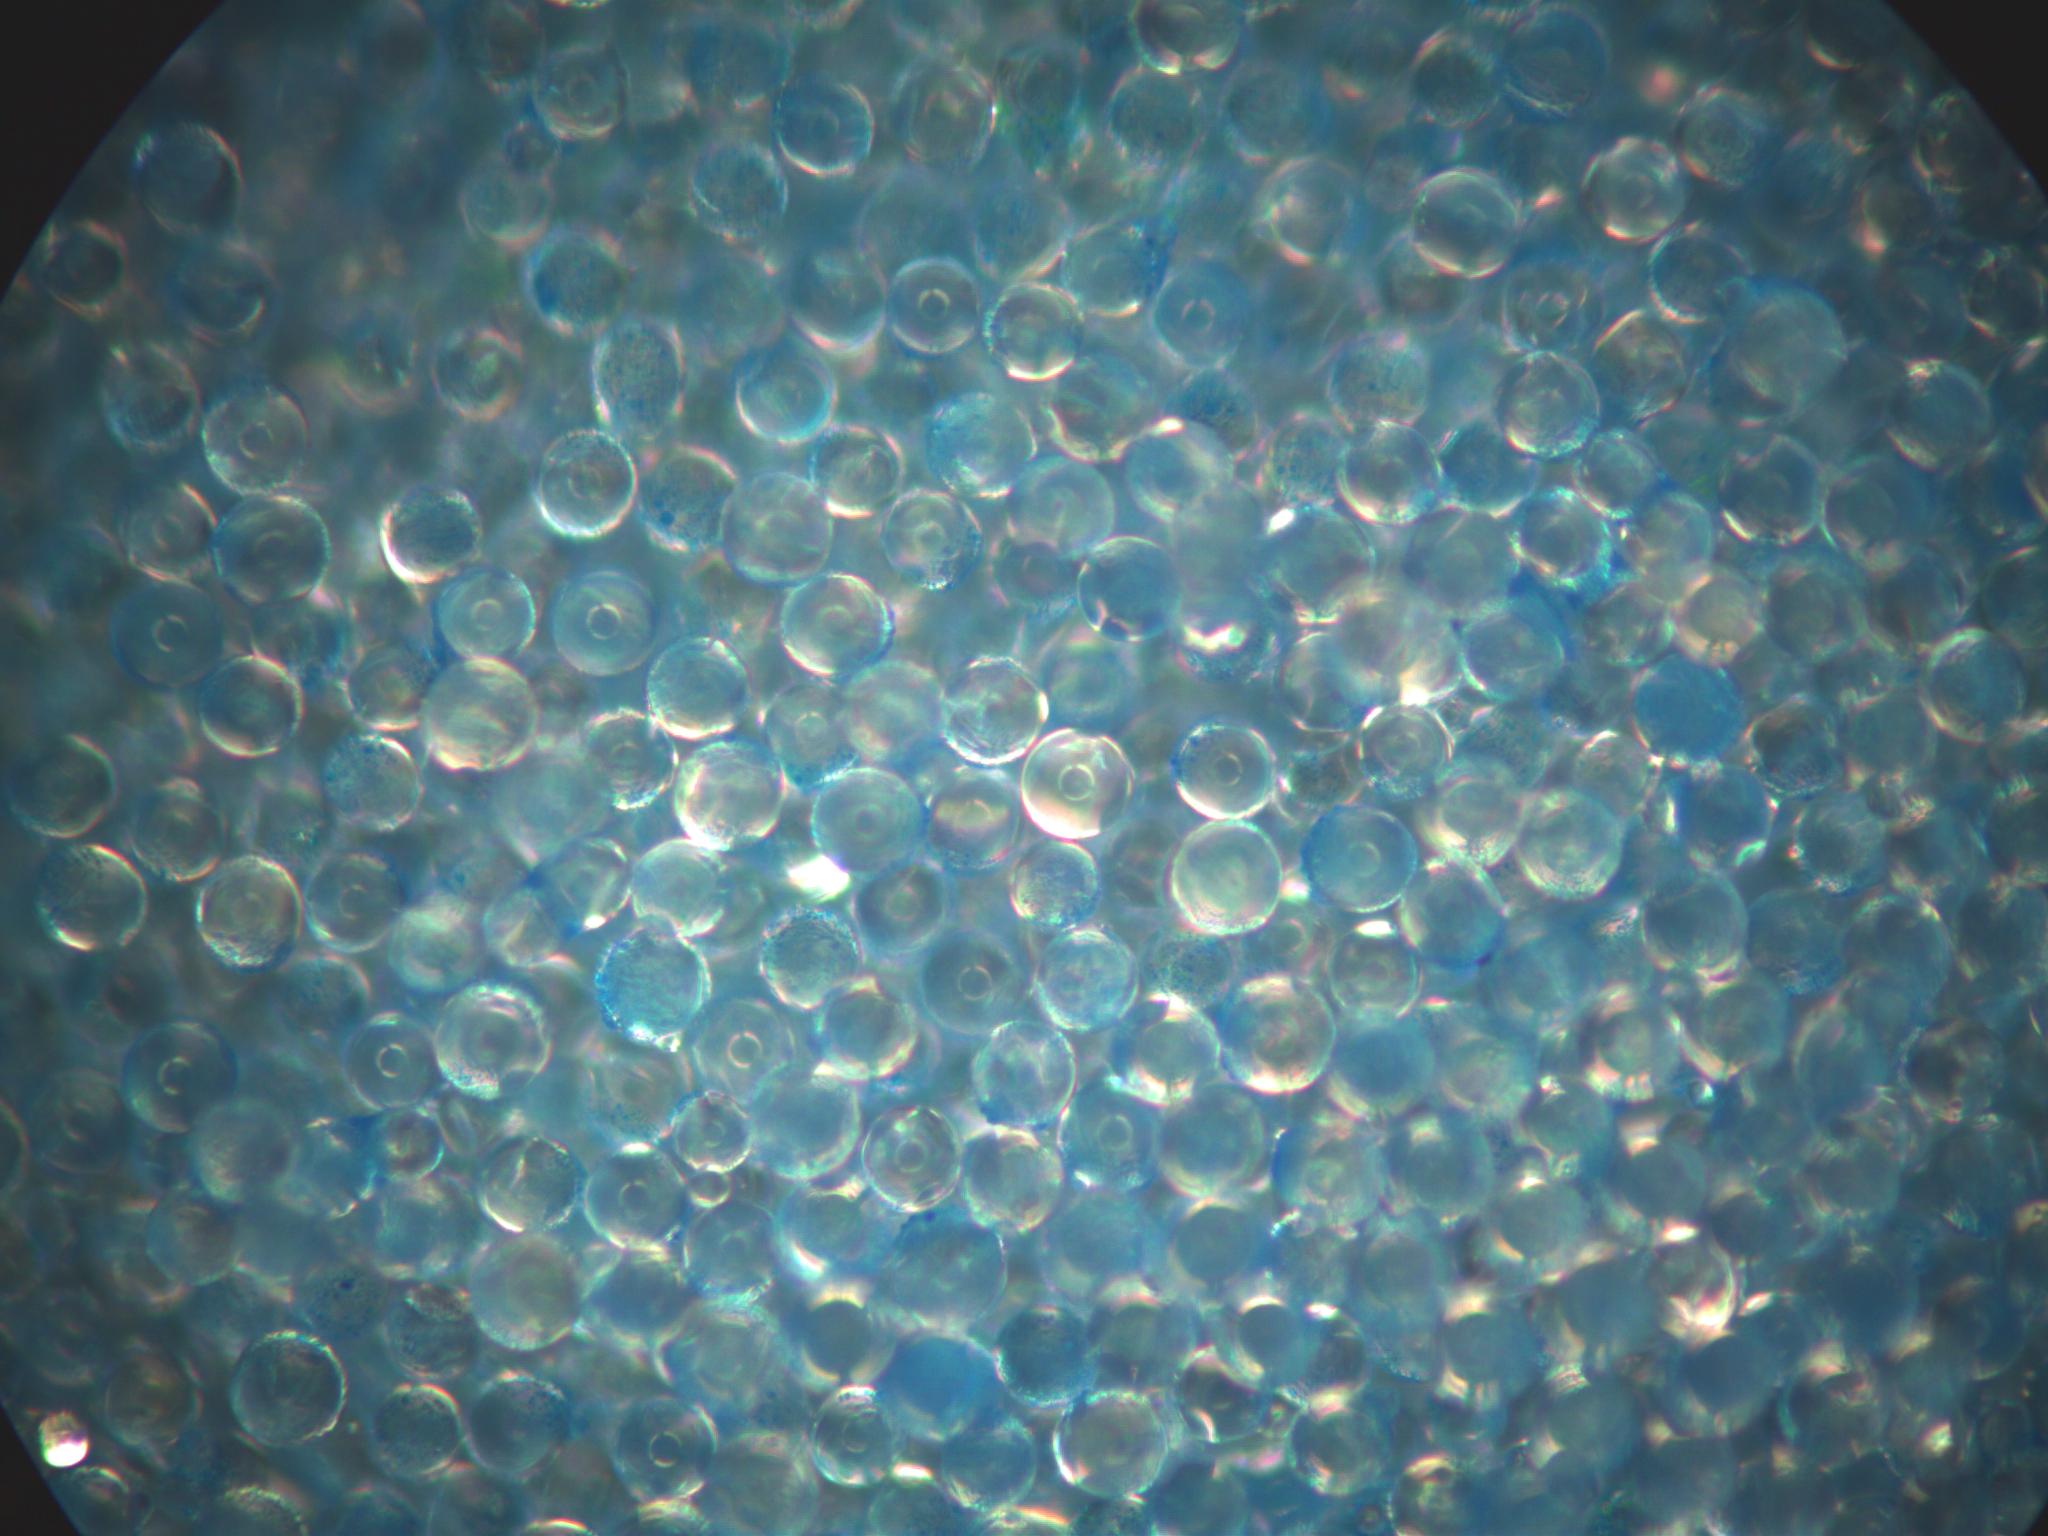 Blue Fluorescent Hemispherical Coating on Solid Glass Microspheres 45-53 micron - 200X magnification